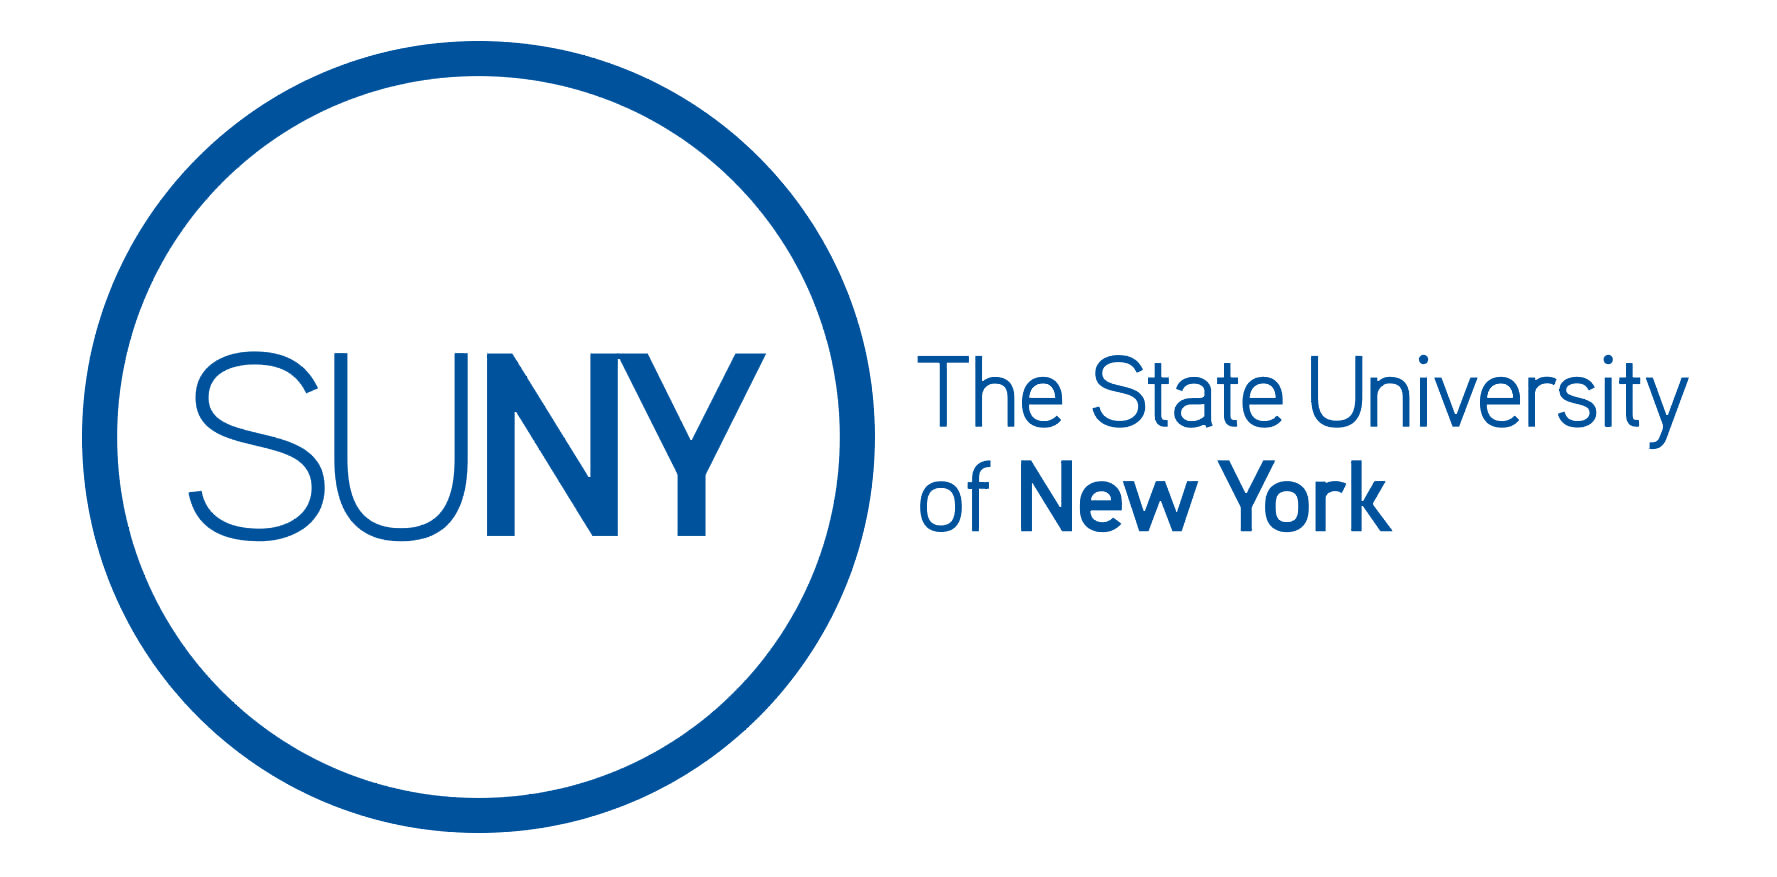 The State University of New York